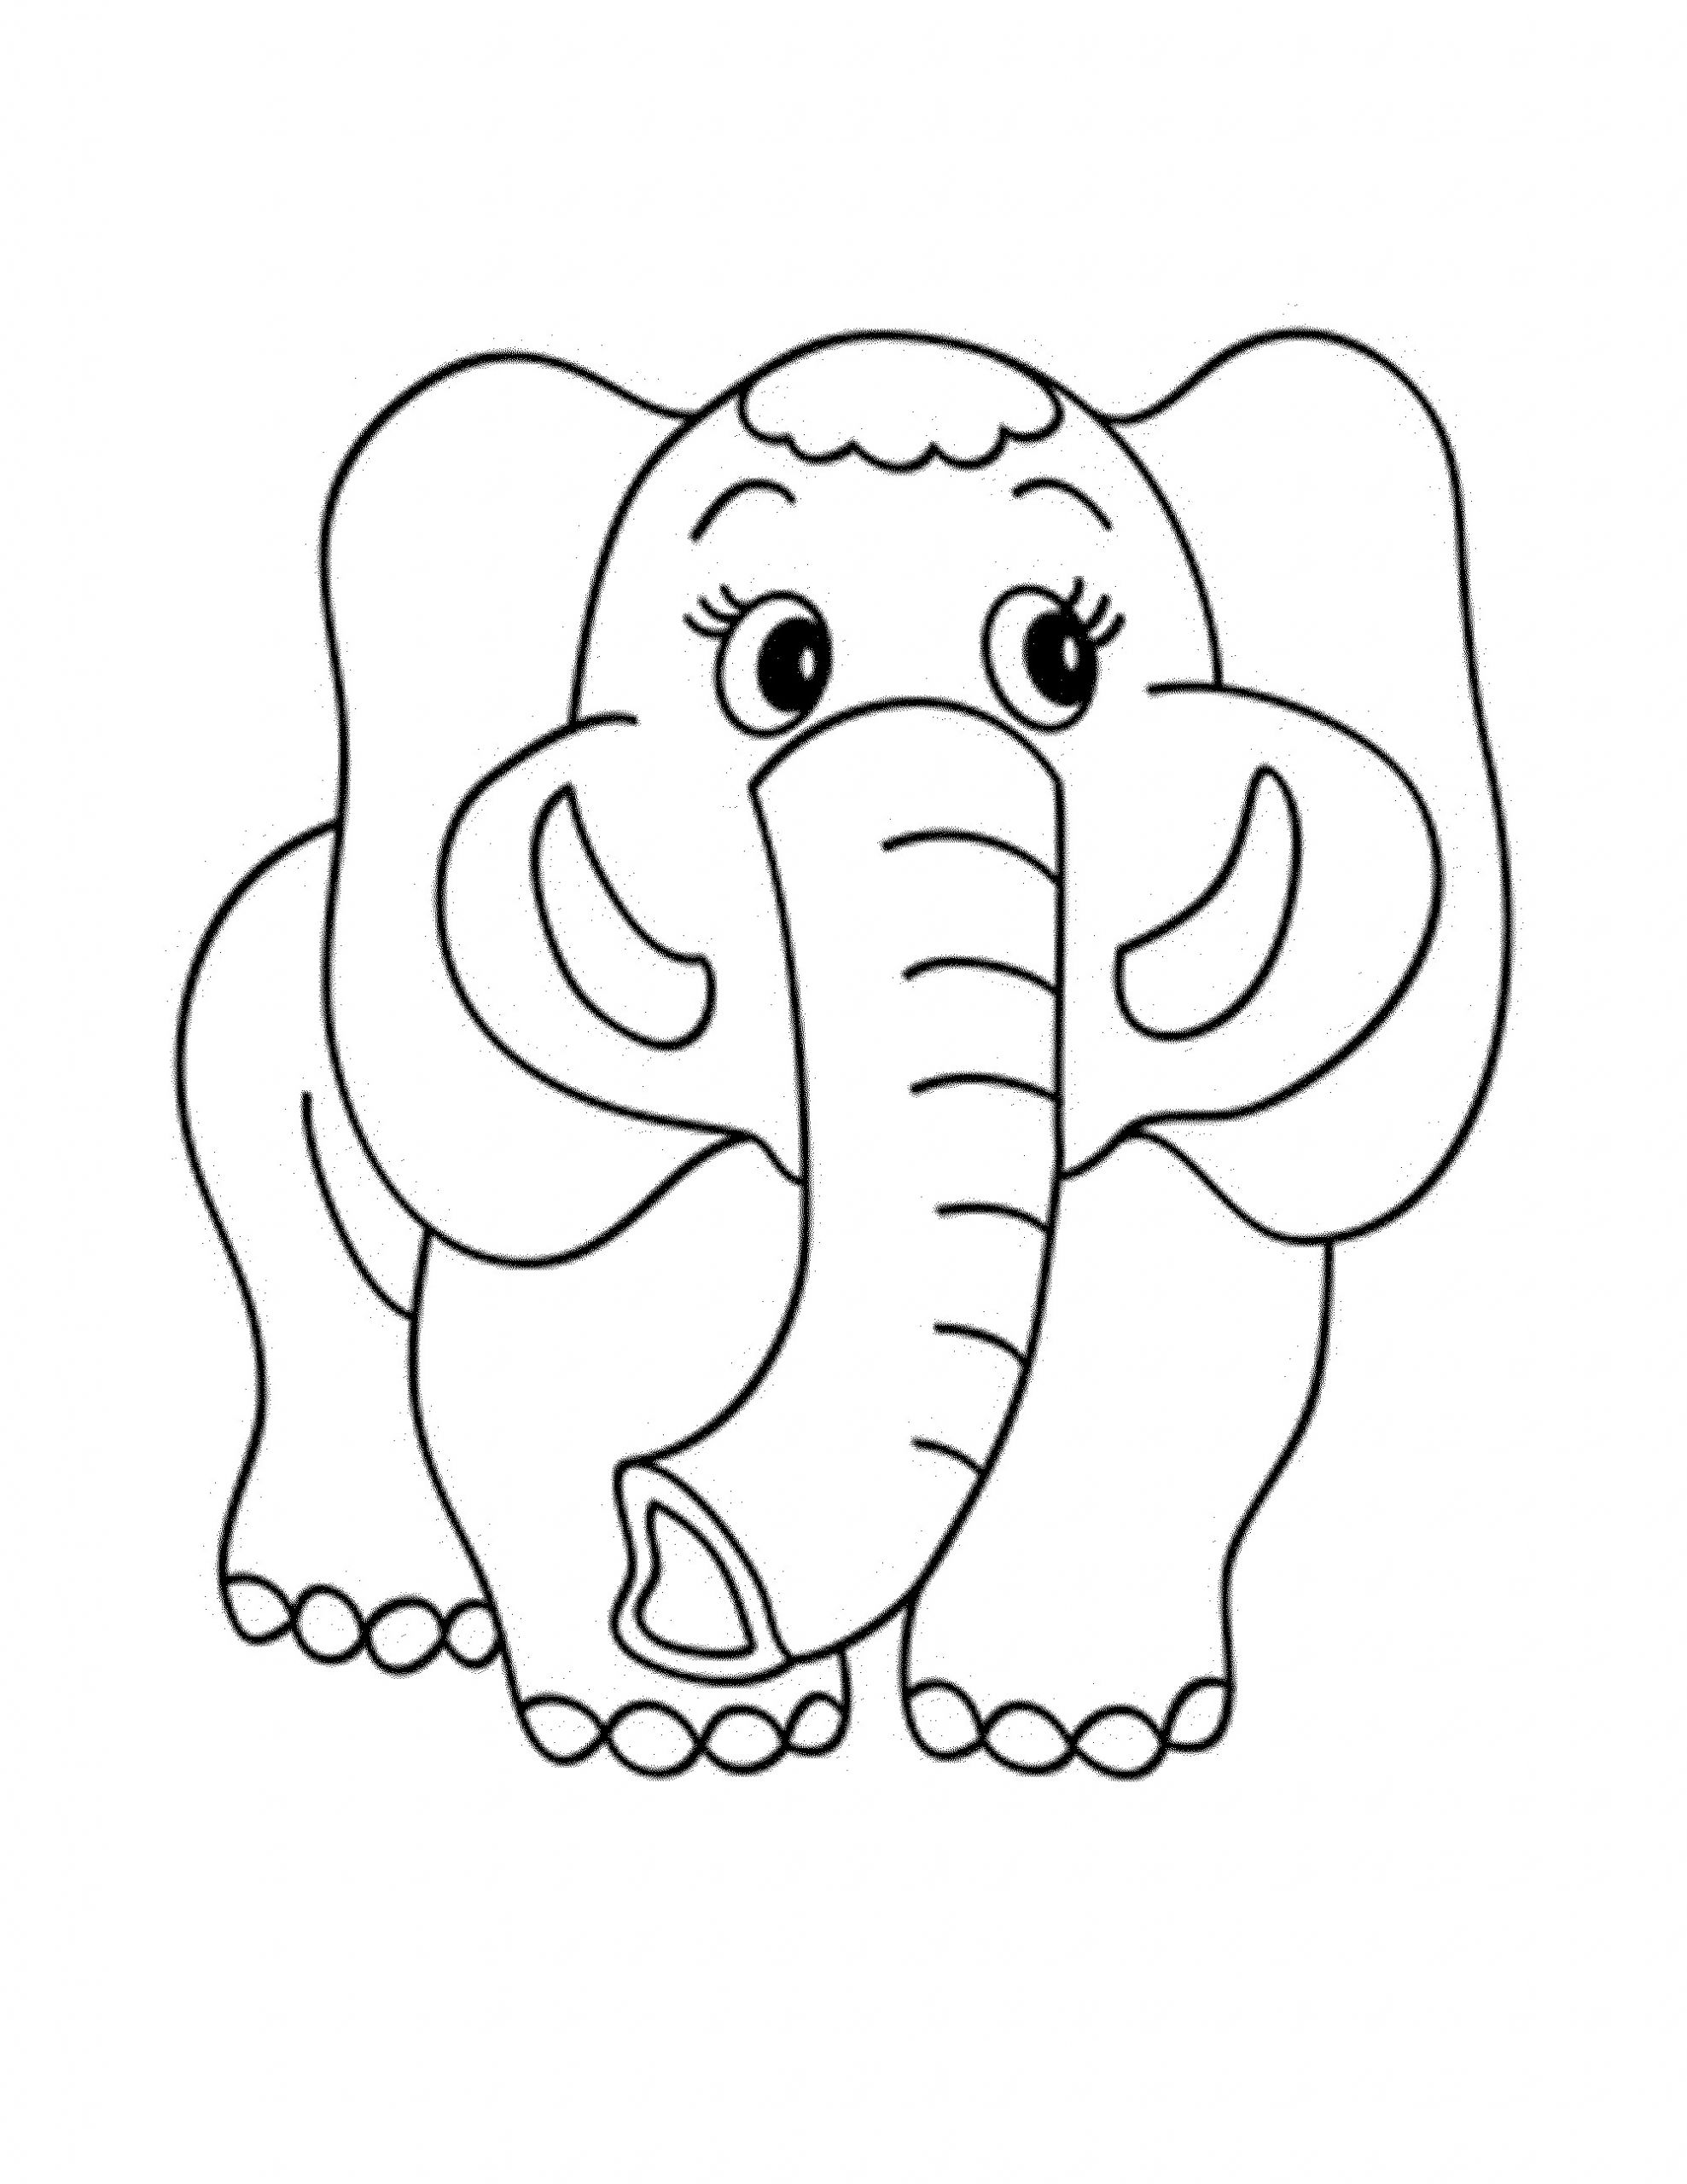 Cute Baby Elephant Coloring Pages
 Baby Elephant Coloring Pages at GetColorings